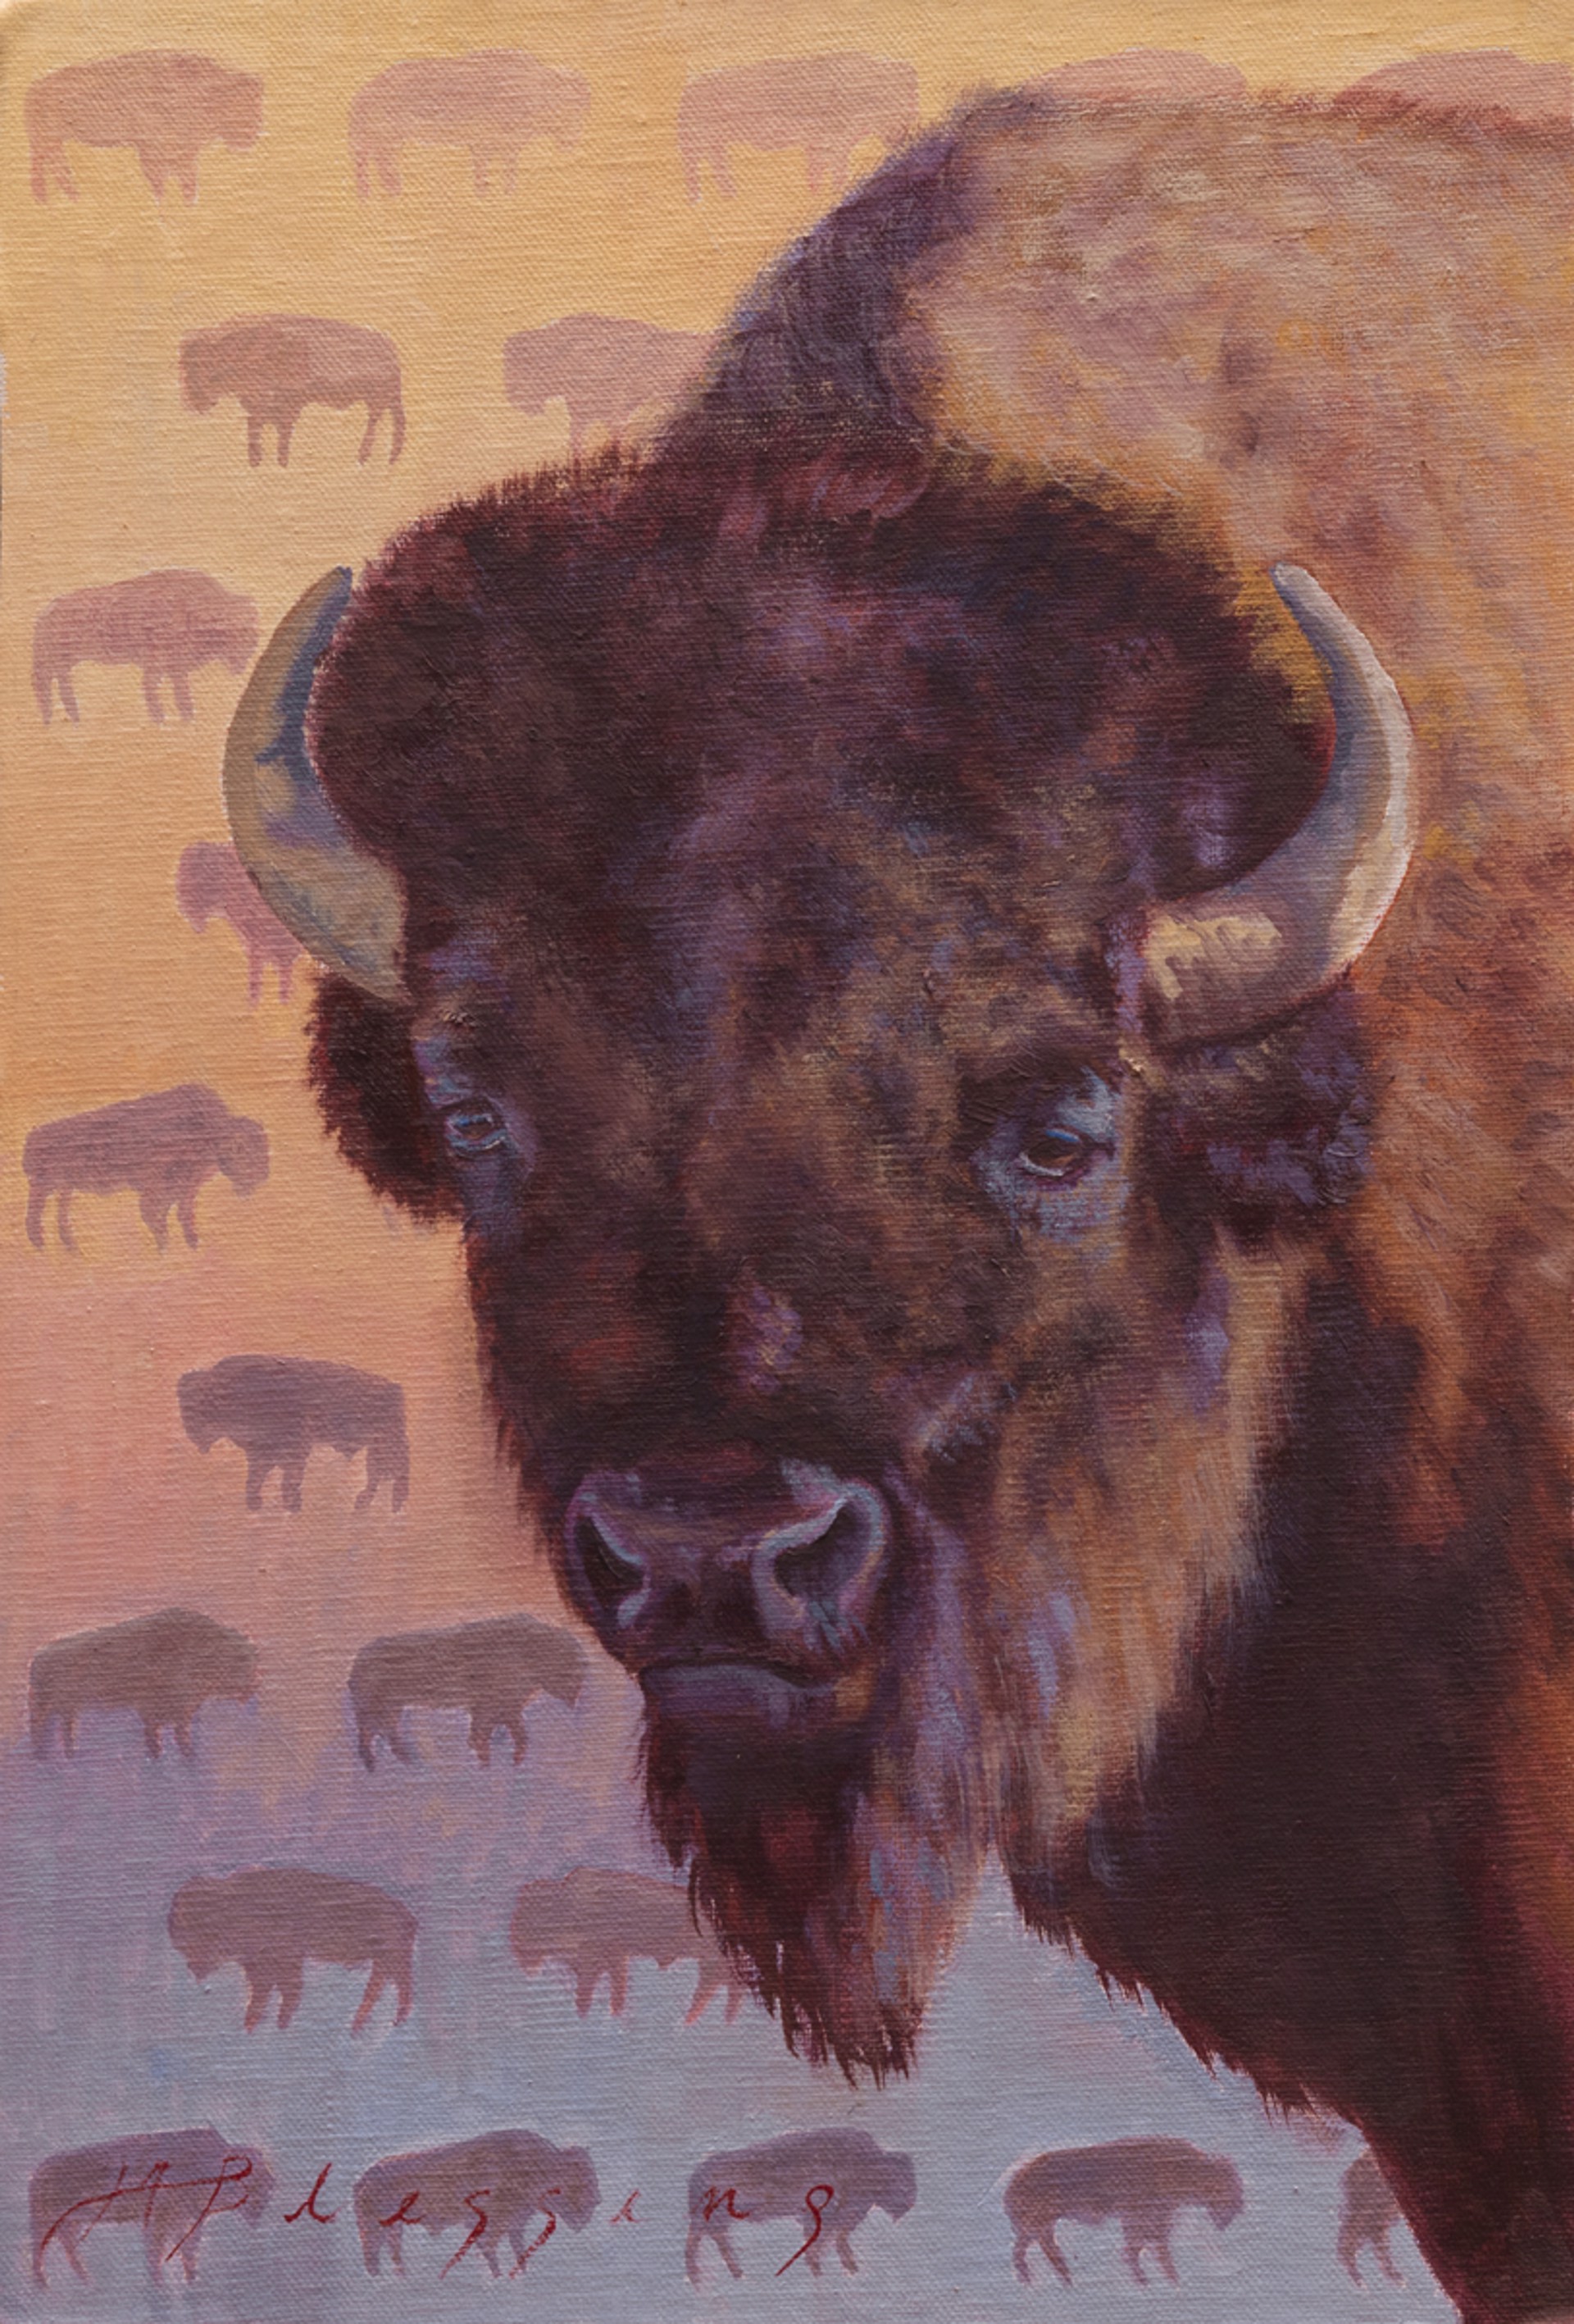 A Contemporary Oil Painting By Meagan Blessing Of A Bison Portrait Featuring A Purple Pink Yellow Background With Small Bison Silhouettes, Fine Art By Meagan Blessing Available At Gallery Wild